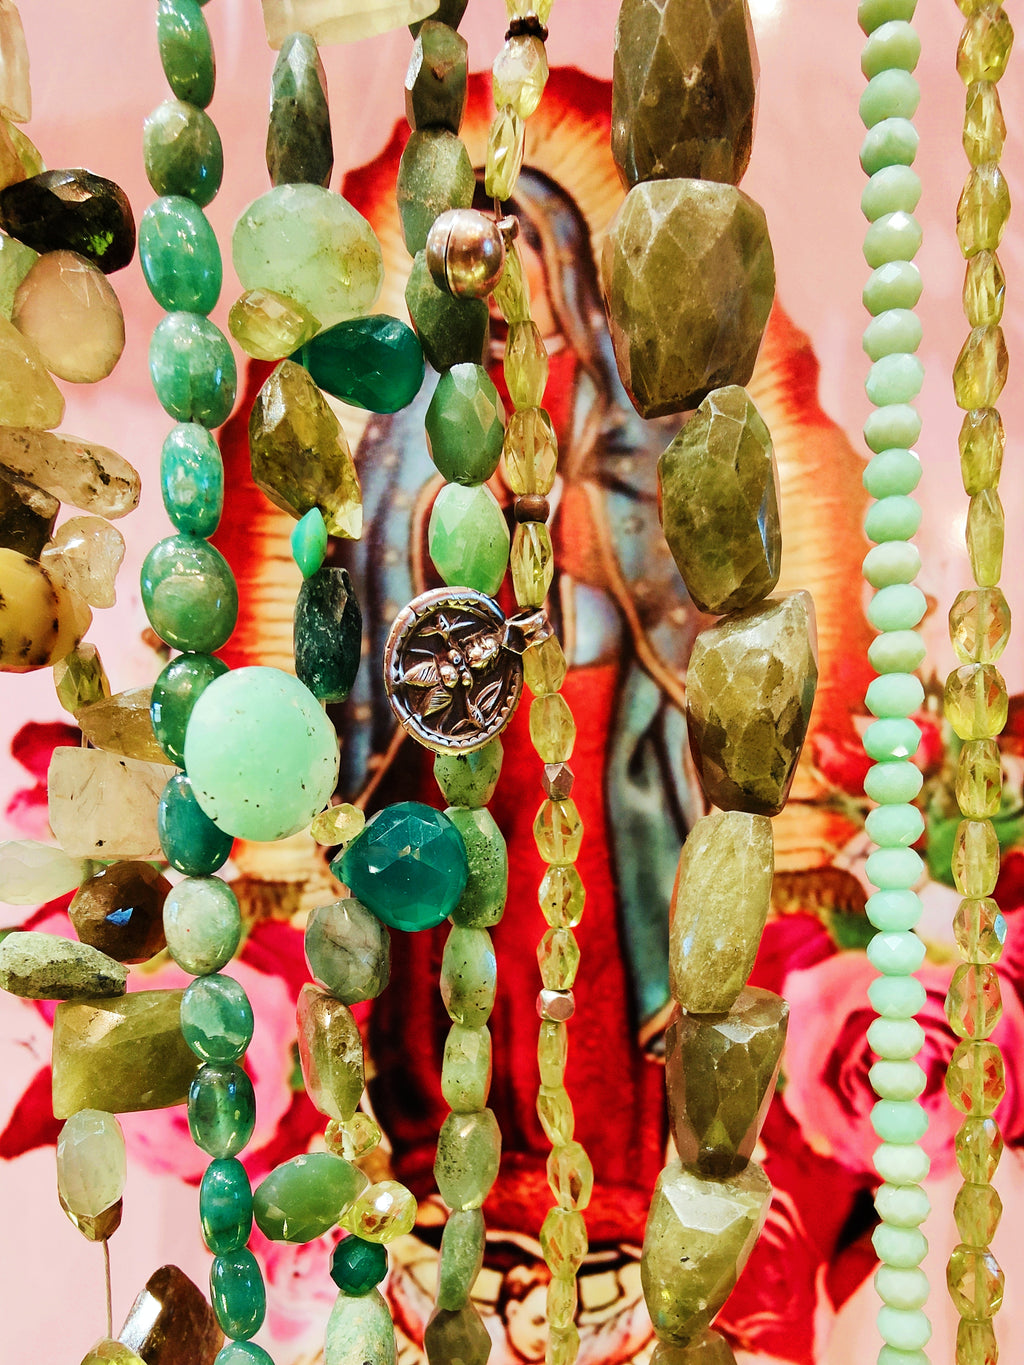 Gorgeous green precious and semi-precious stone bead necklaces hand cut in India.

Emeralds,peridot,onyx, chalcedony, chrysoprase,moss agate,all our favourite fresh and earthy greens.

Necklaces threaded on tiger tail, by us here at Blackout and finished with silver findings. 

